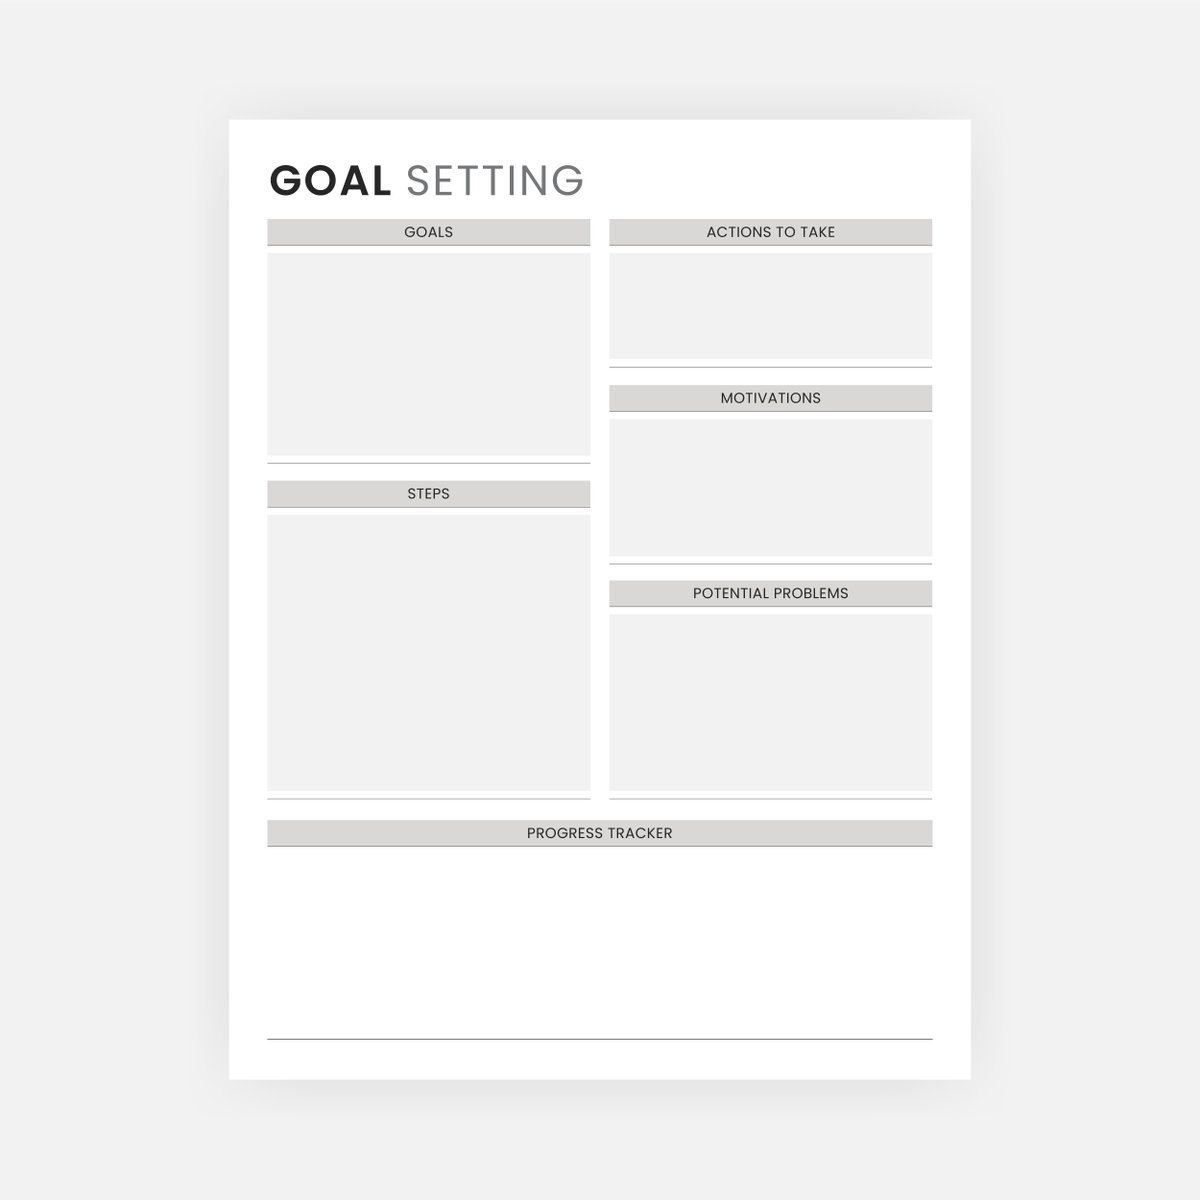 🚀 Ready to conquer your goals? 🌟 Unleash your potential with our exclusive goal-setting worksheet printable planner! 📈✨
🔗 lnkd.in/gAPXX3tT

#GoalSetting
#PlannerEssentials
#SuccessTips
#Motivation
#ProductiveLife
#DreamPlanAchieve
#GoalDriven